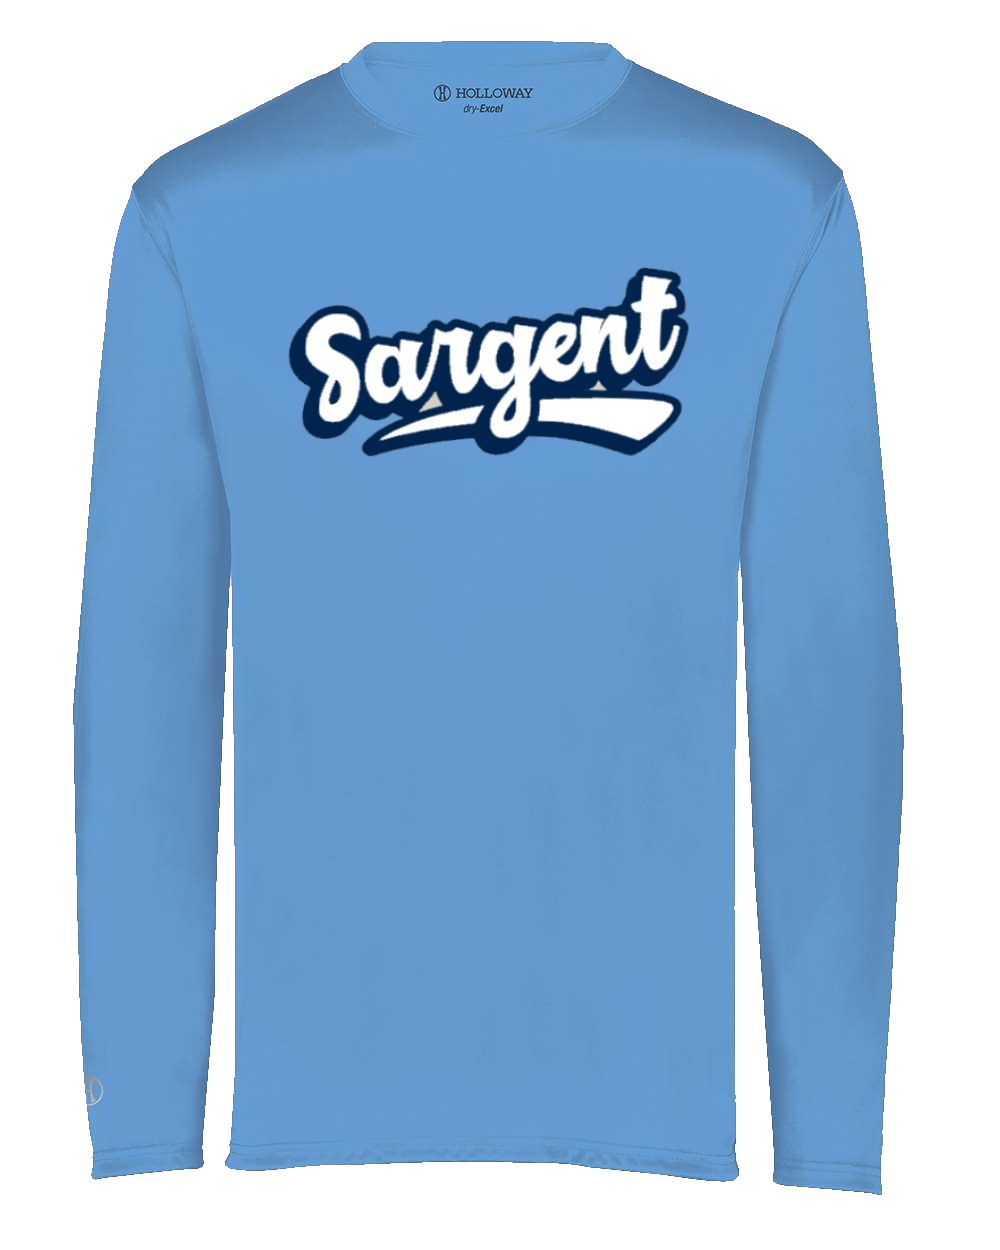 Sargent Performance Long Sleeve